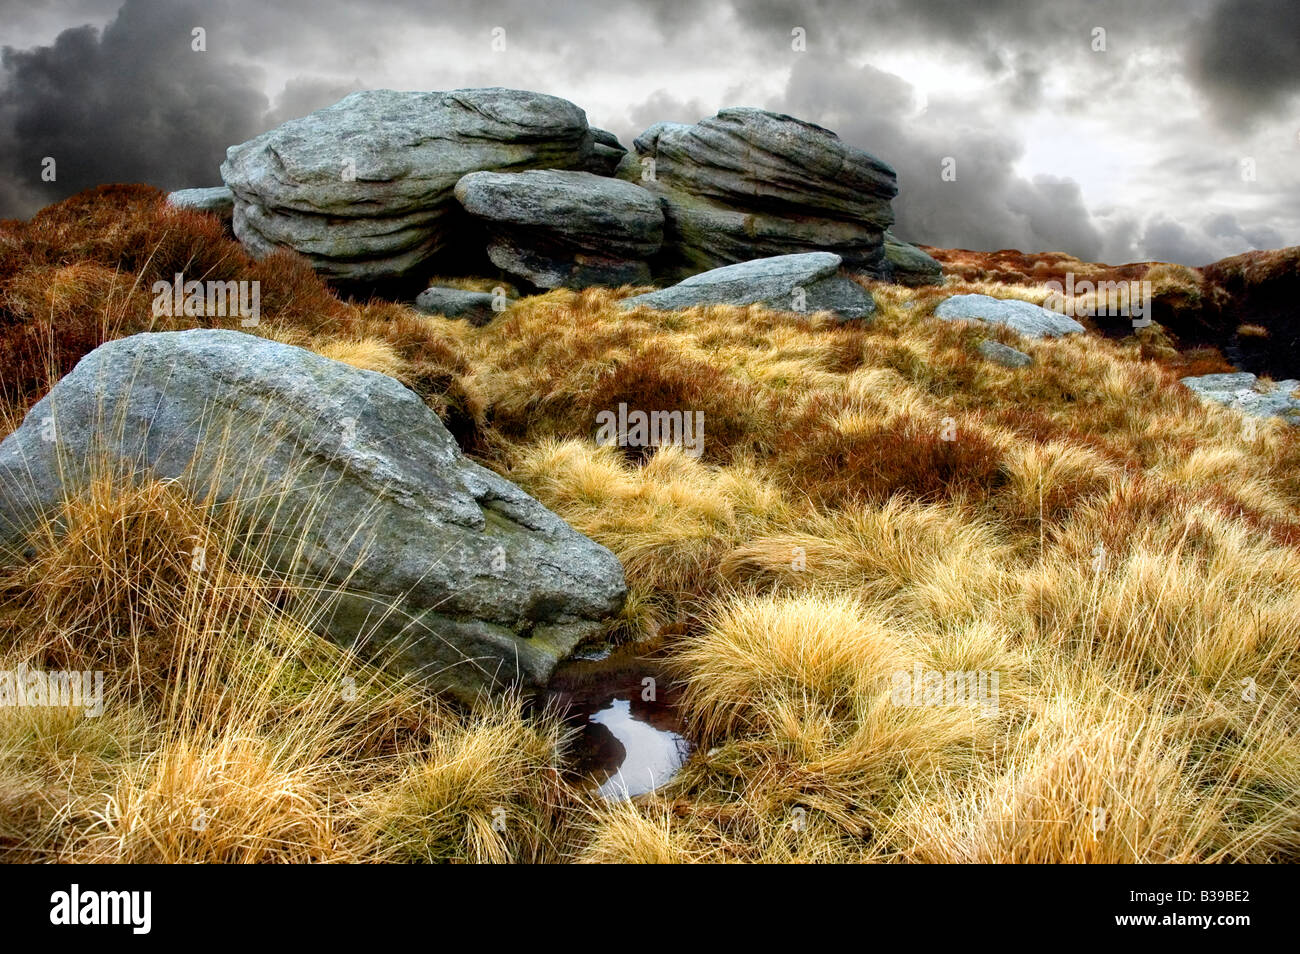 MOORLAND ROCKS WITH GREY CLOUDY SKY GRASSES Stock Photo